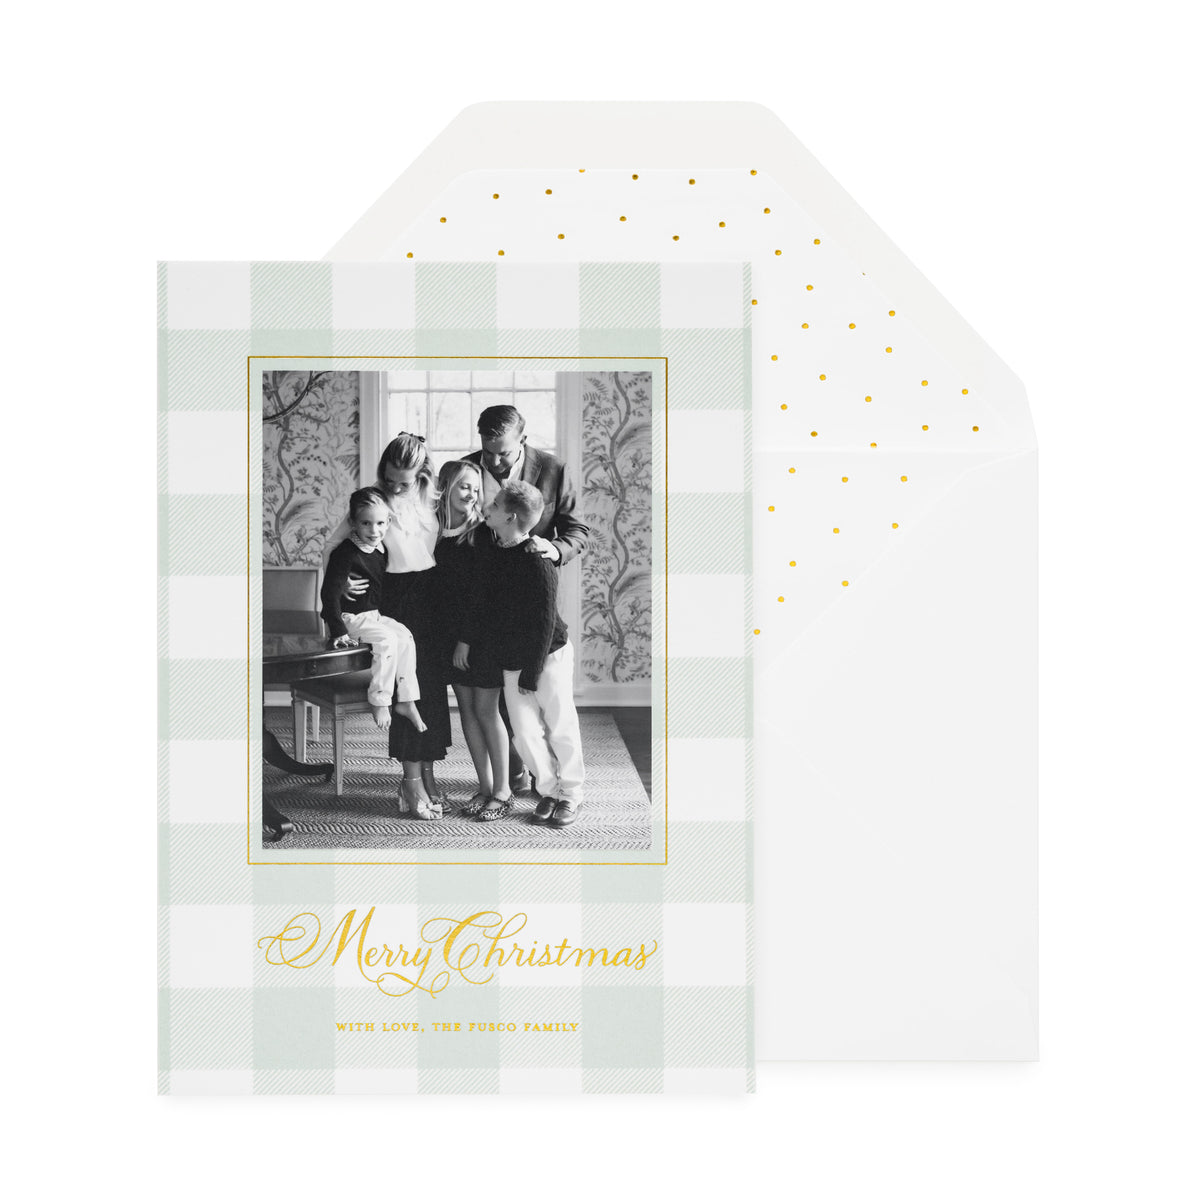 Green gingham custom holiday photo card with gold foil